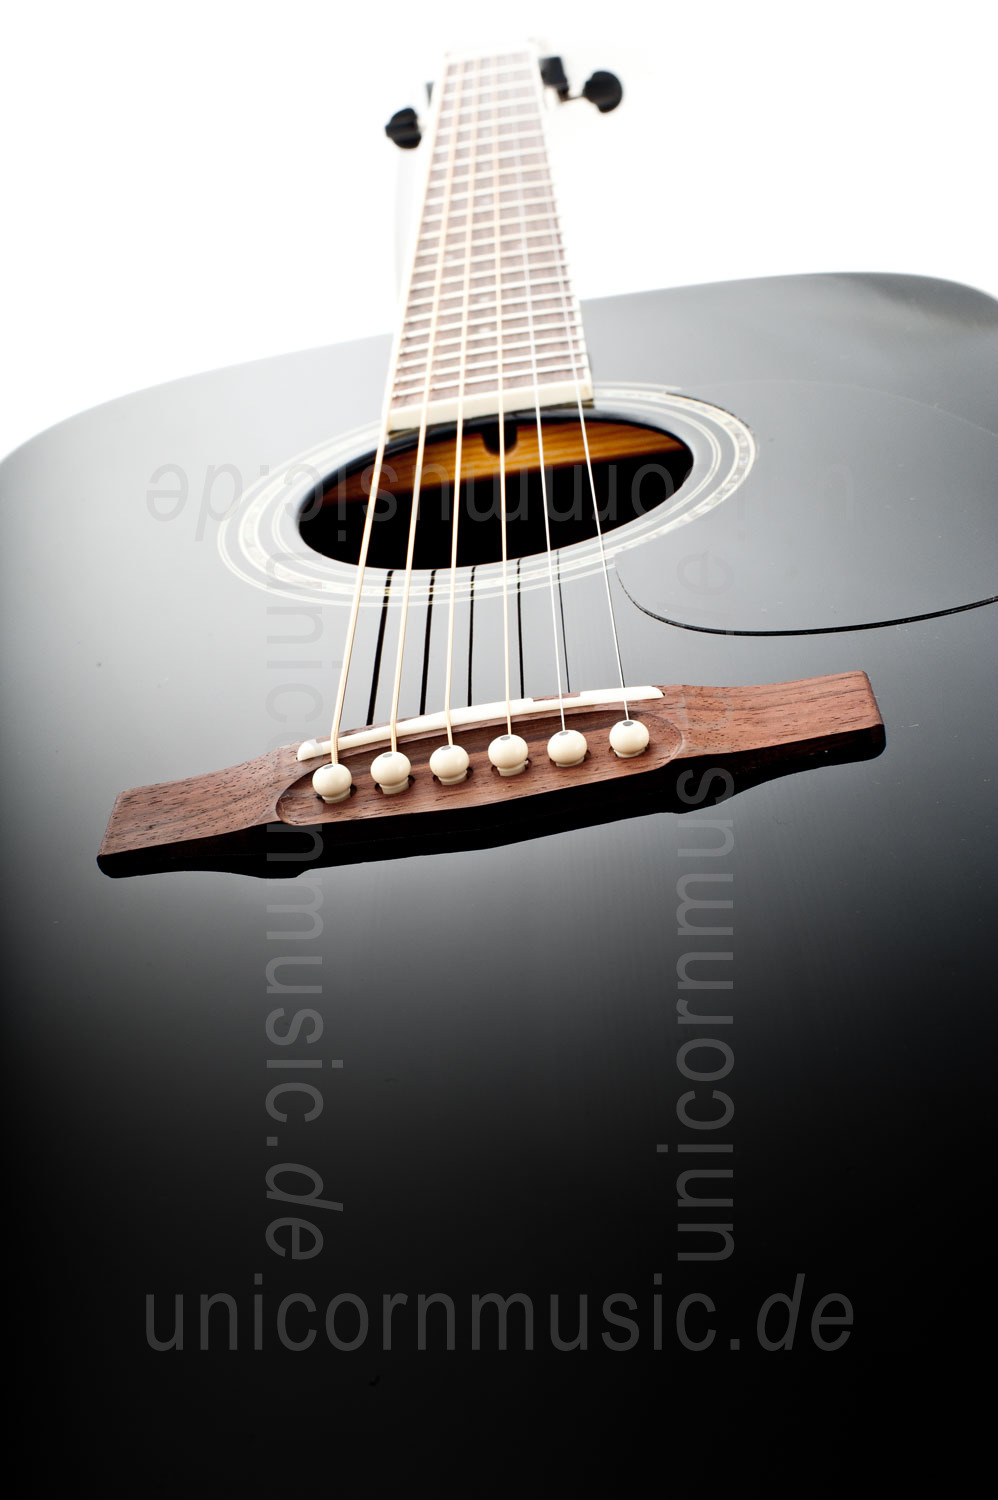 to article description / price Acoustic Guitar CORT EARTH 100 BK - Dreadnought - solid spruce top